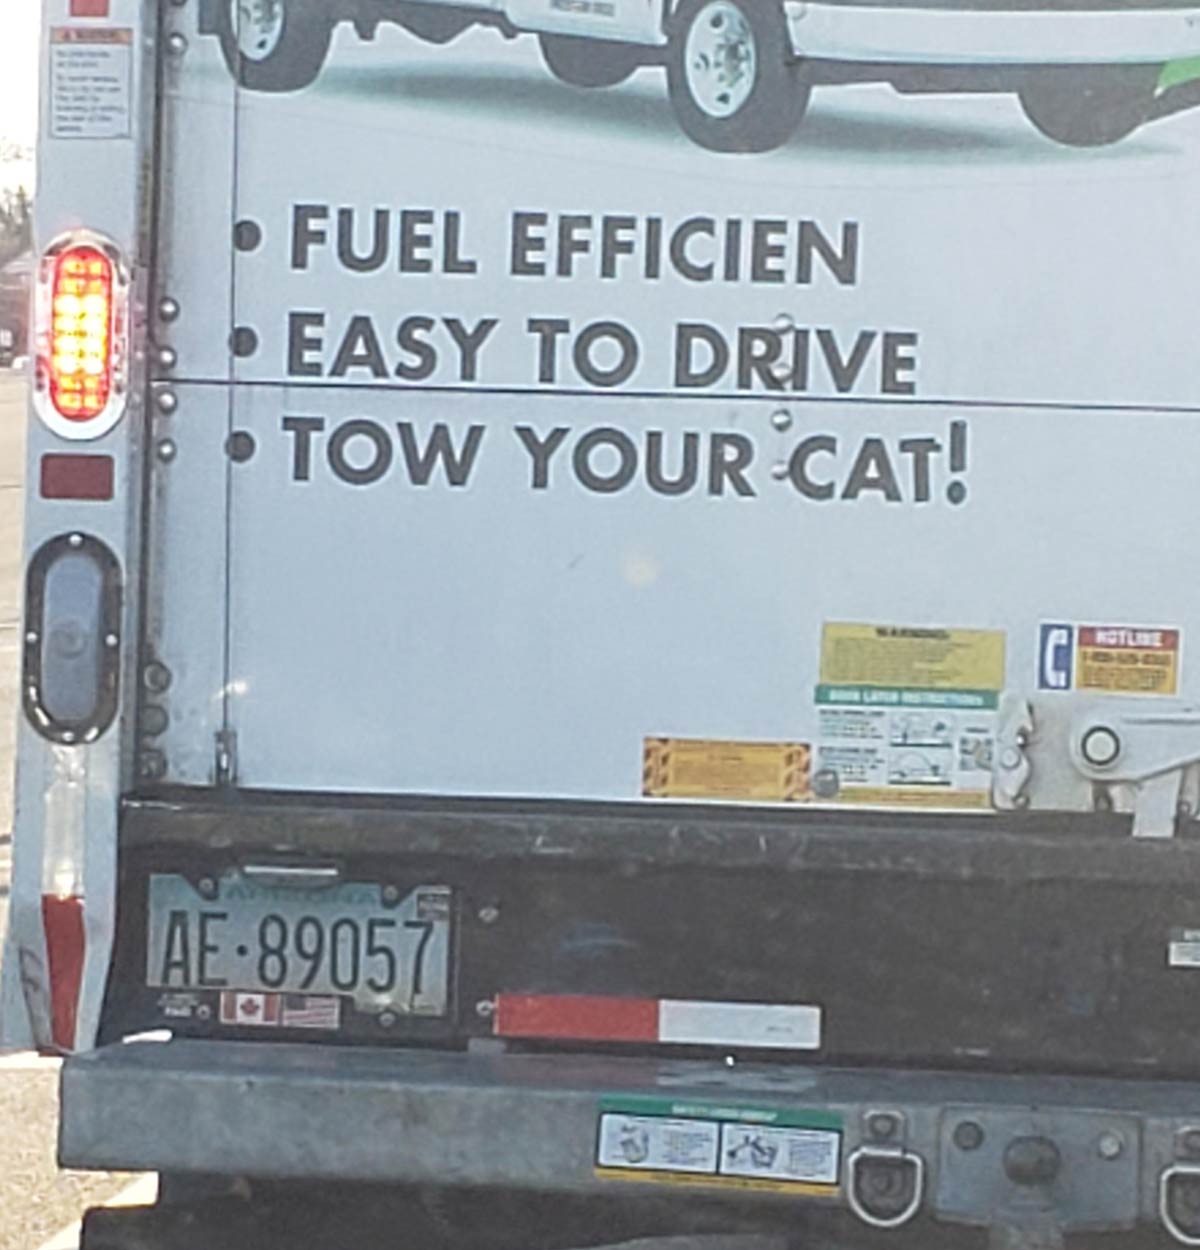 Tow Your Cat!